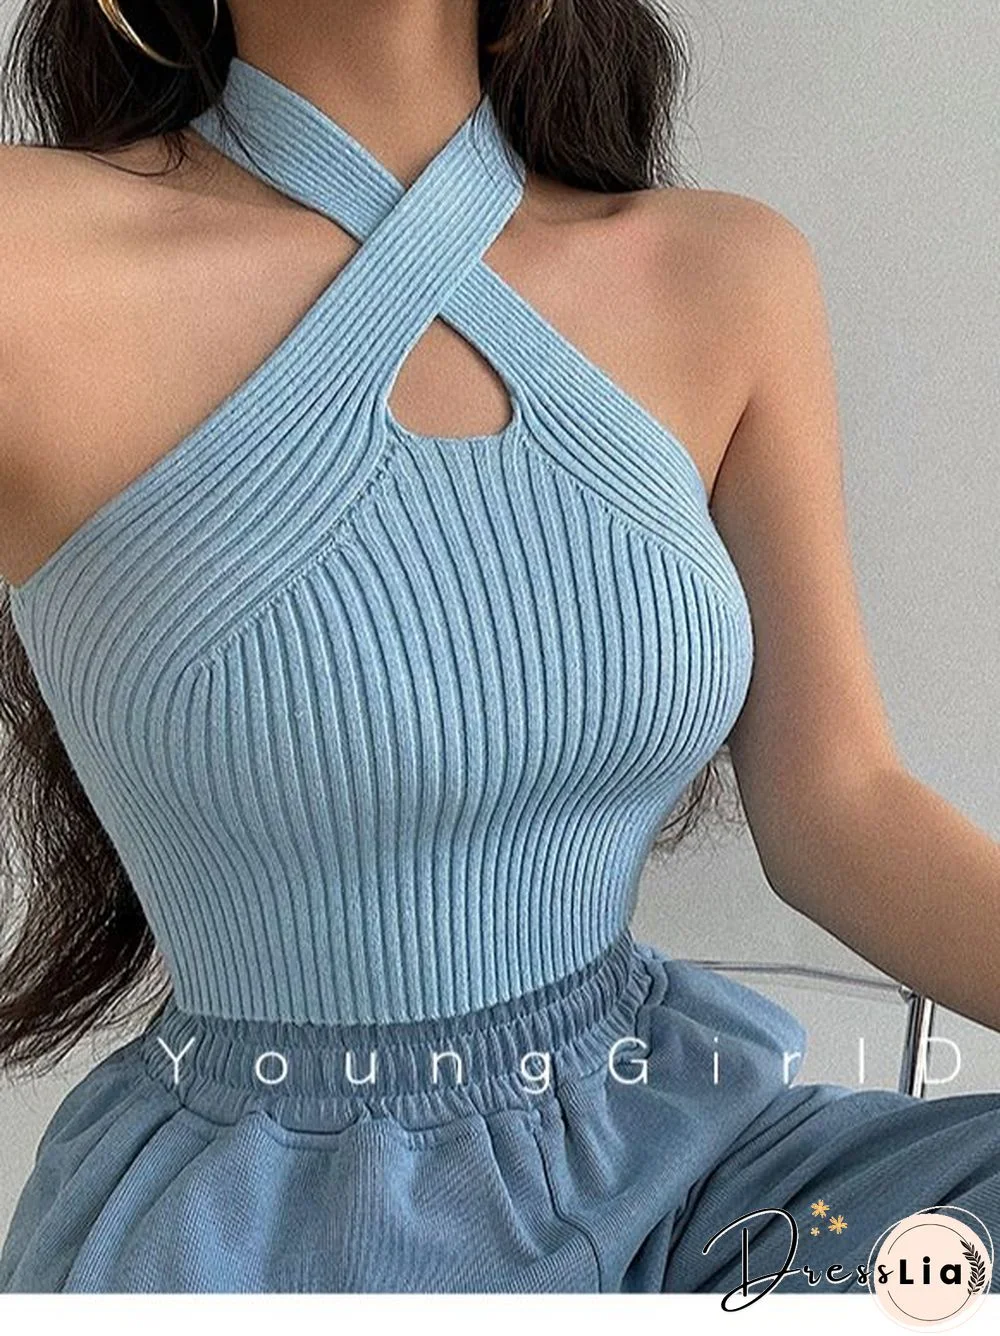 Women Cross Halter Tops Female Off Shoulder Crop Tops Knitted Strappy Sexy Tank Tops Y2K Tops For Women Summer